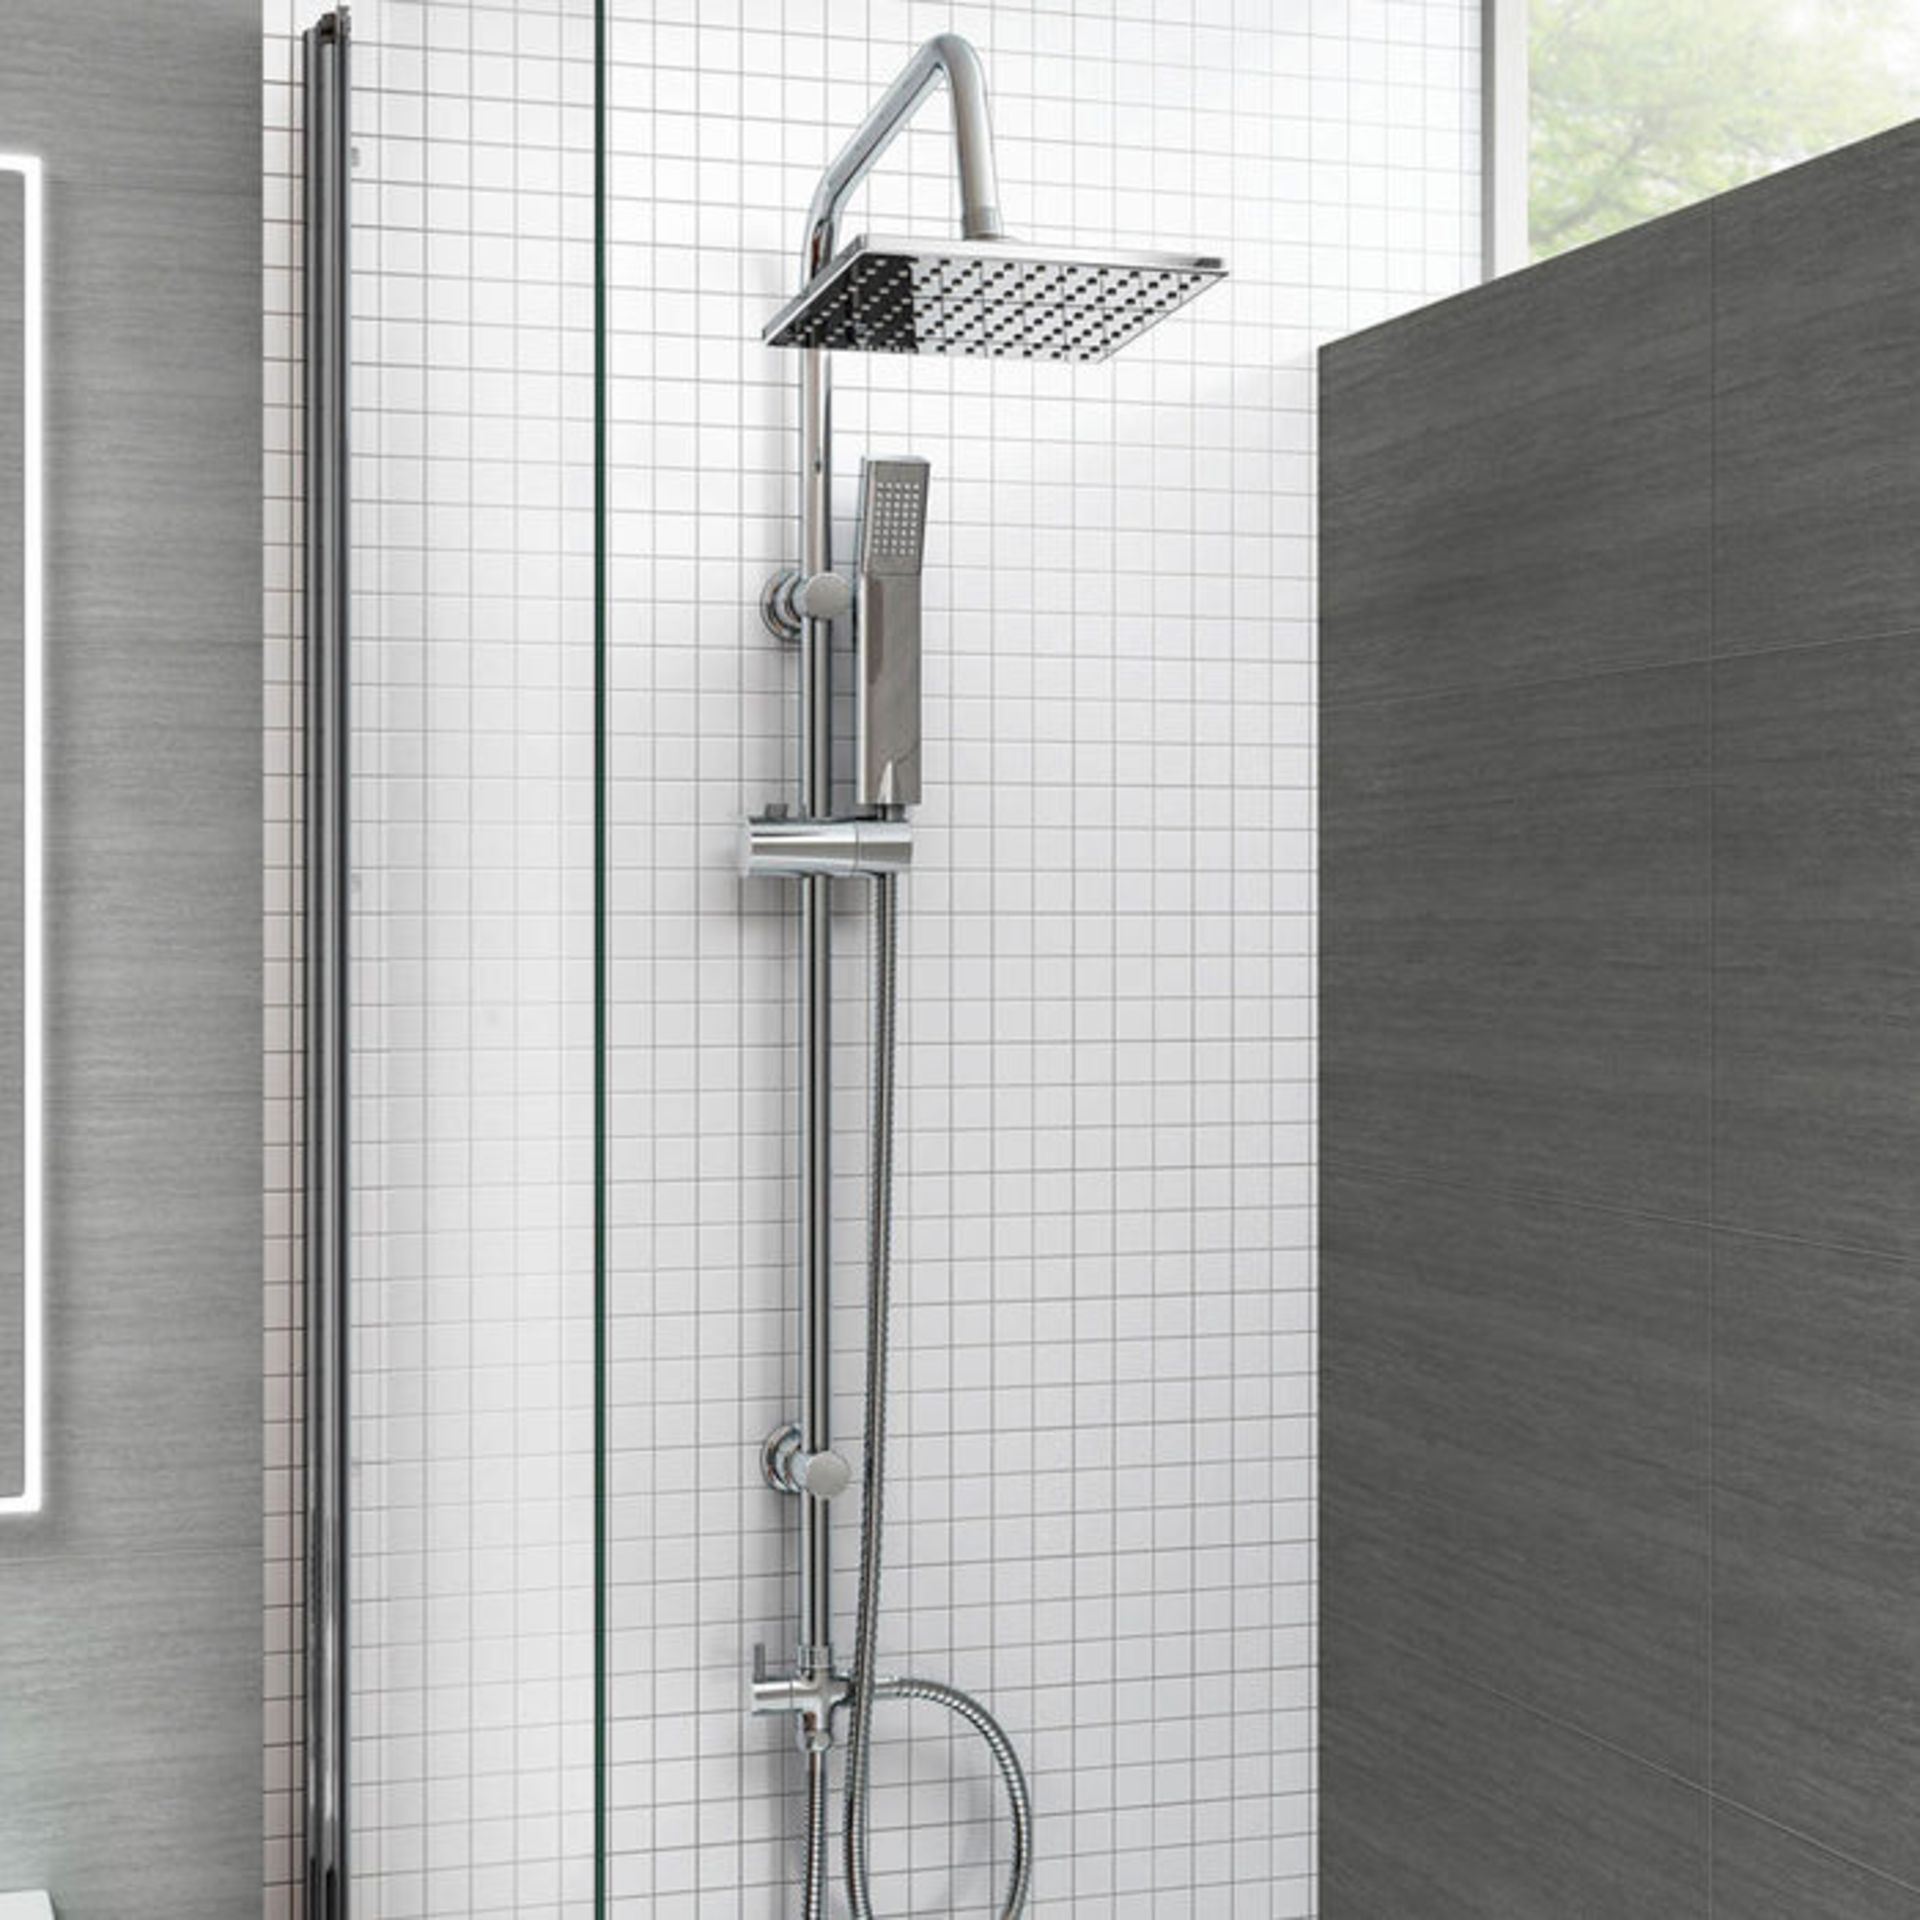 (LU117) 200mm Square Head, Riser Rail & Handheld Kit. Quality stainless steel shower head with - Image 4 of 4